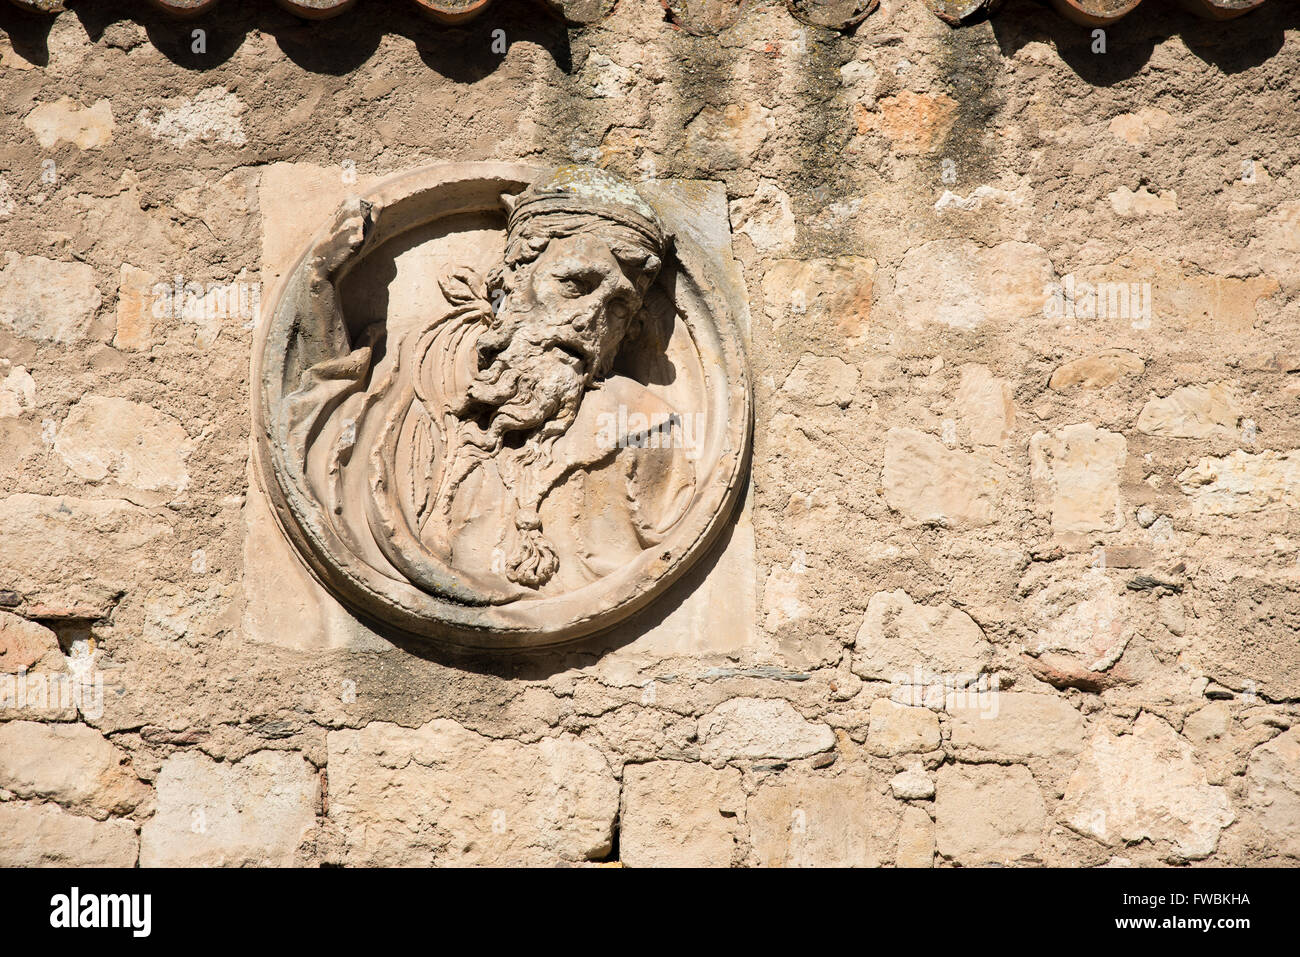 A stone carving near the New Cathedral, Salamanca, Spain. Stock Photo